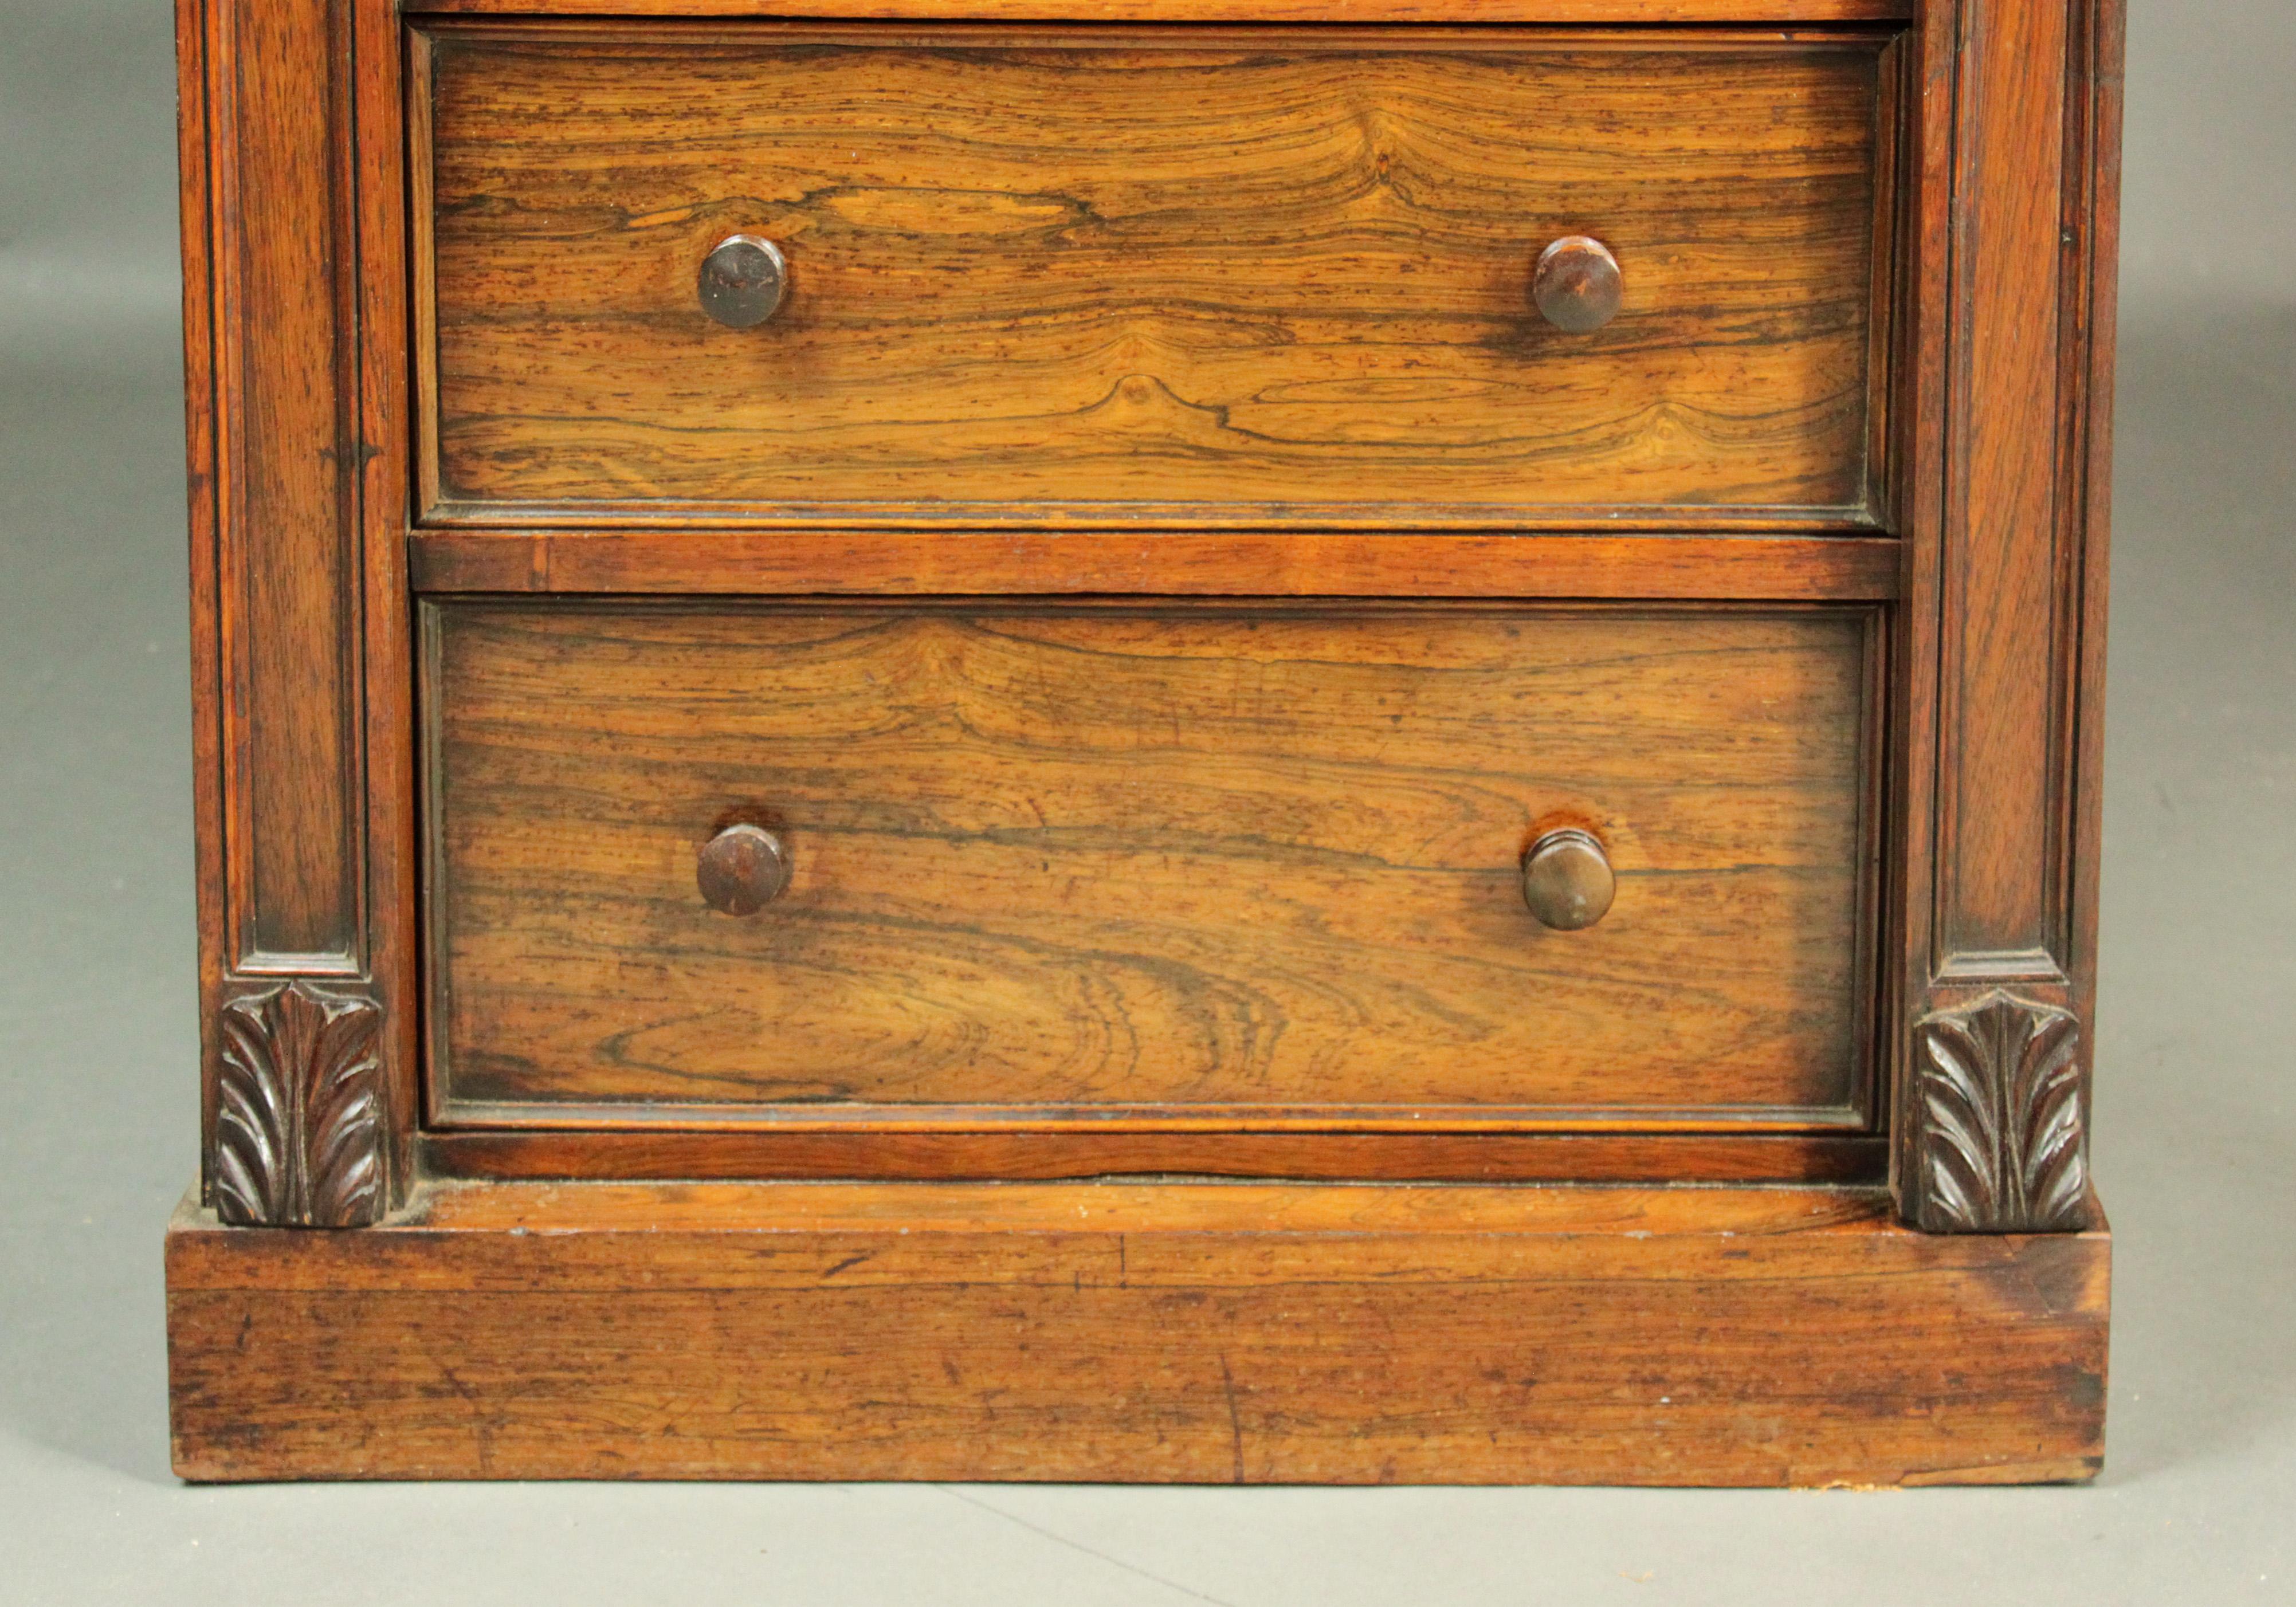 Rosewood Wellington Chest In Good Condition For Sale In Bradford-on-Avon, Wiltshire